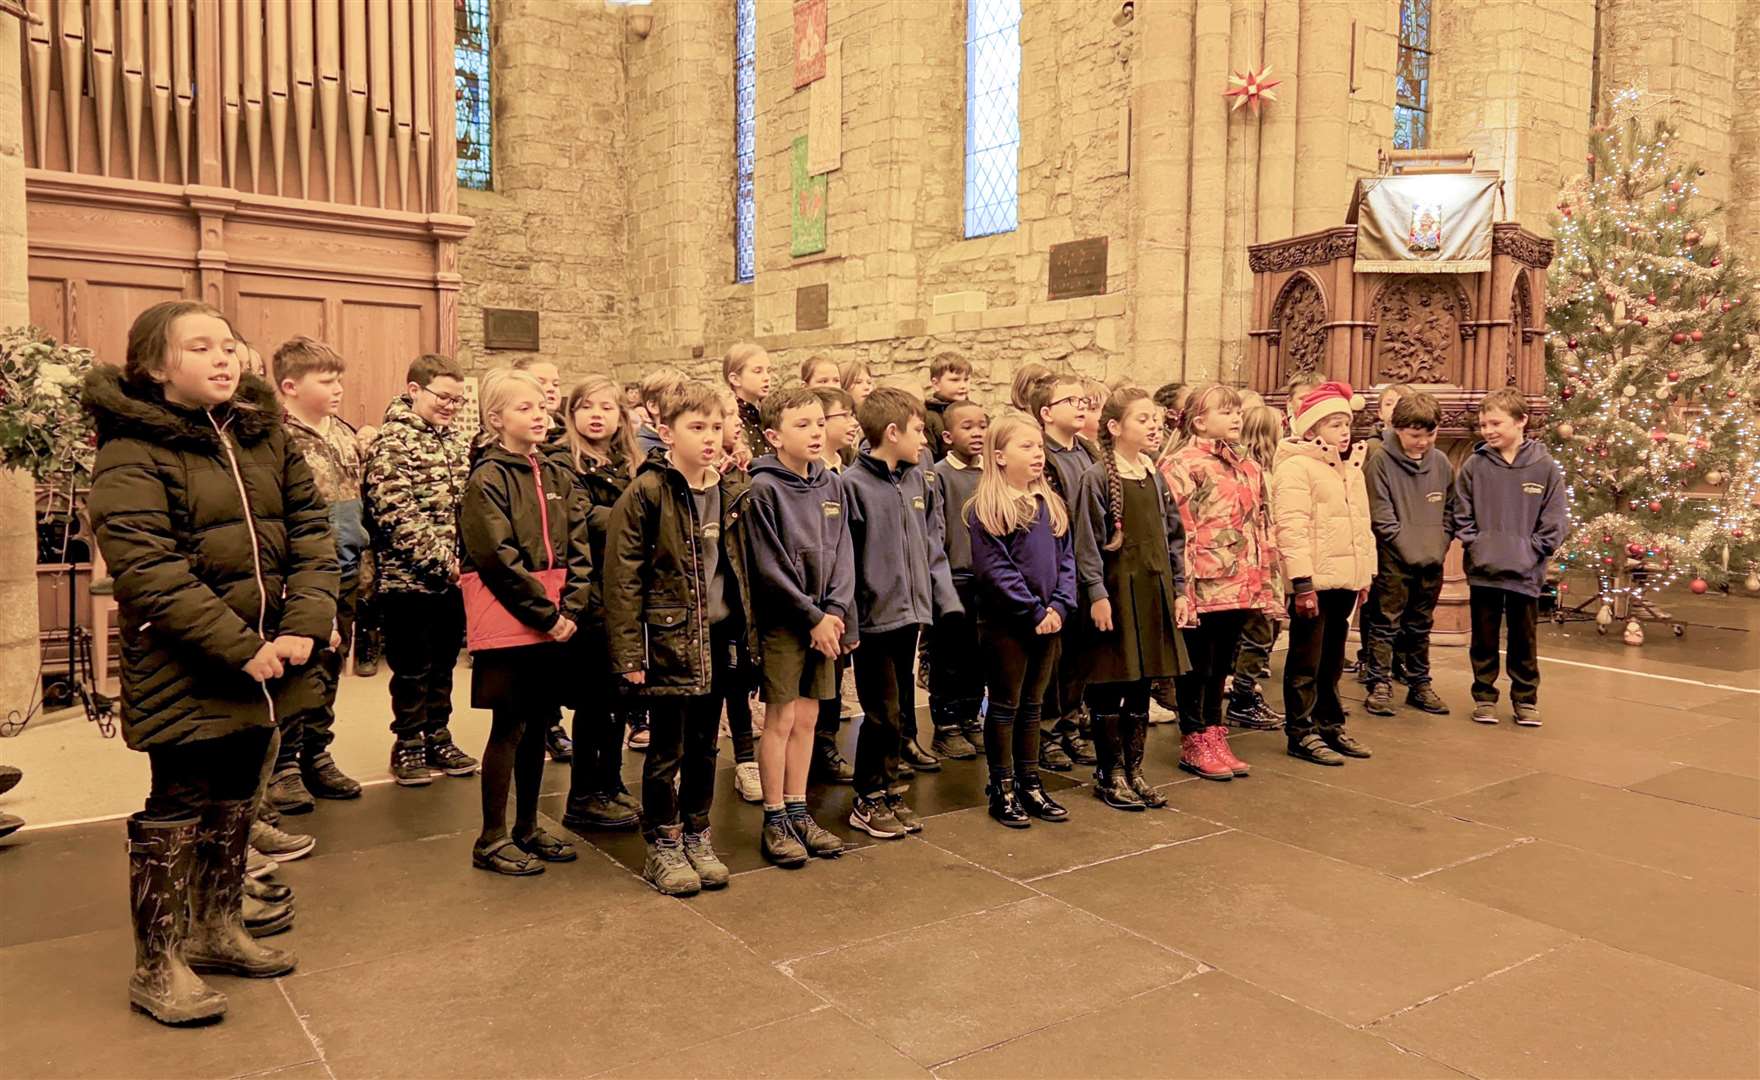 P4s and P5s sang the 'Christmas Calypso' to entertain the crowds.